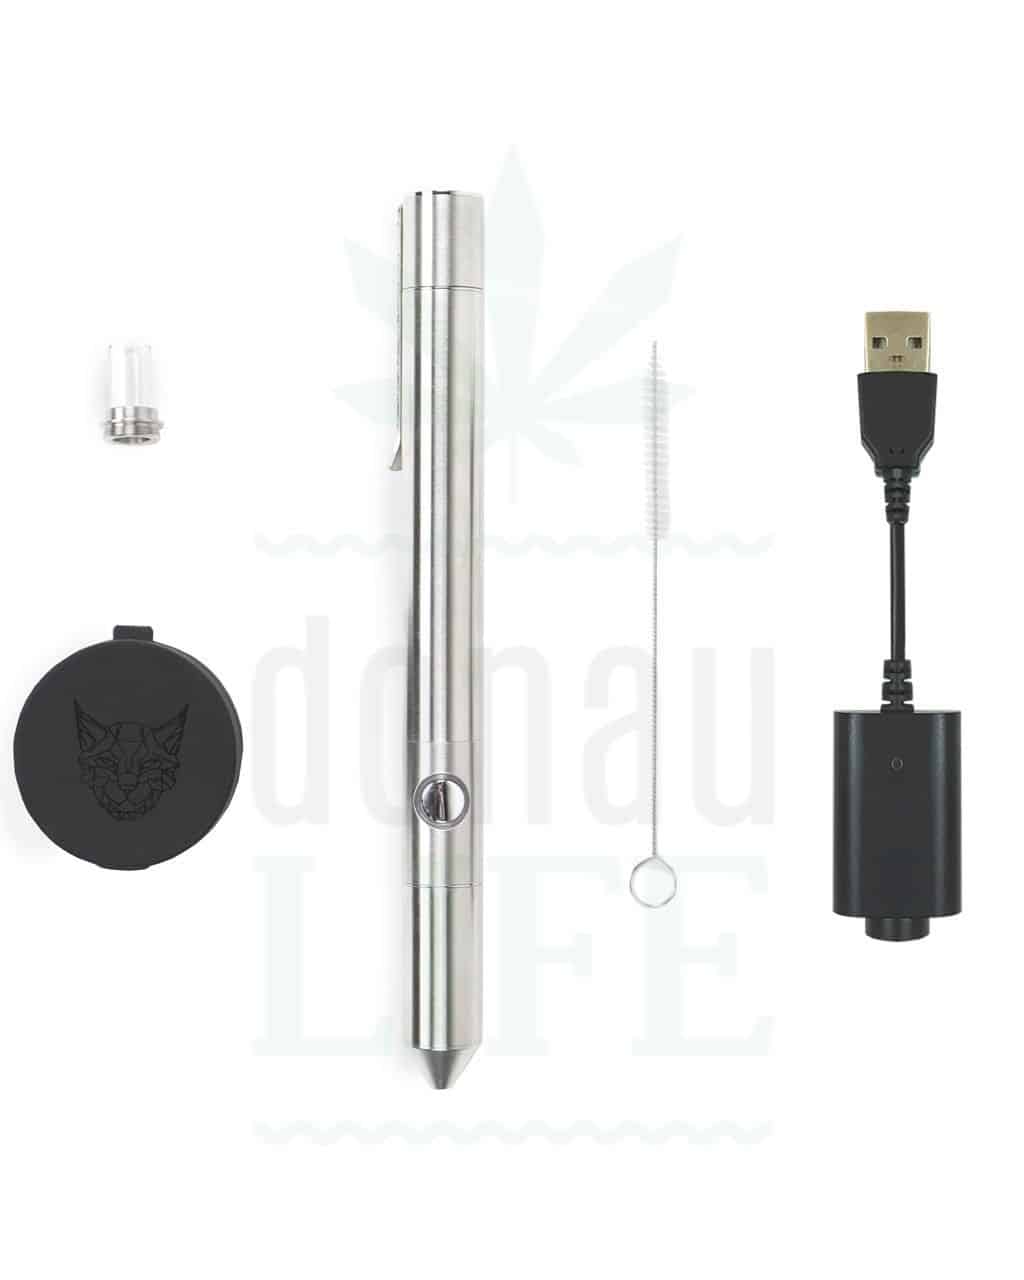 Vaporizer Linx Ares mobile vaporizer | pen for extracts